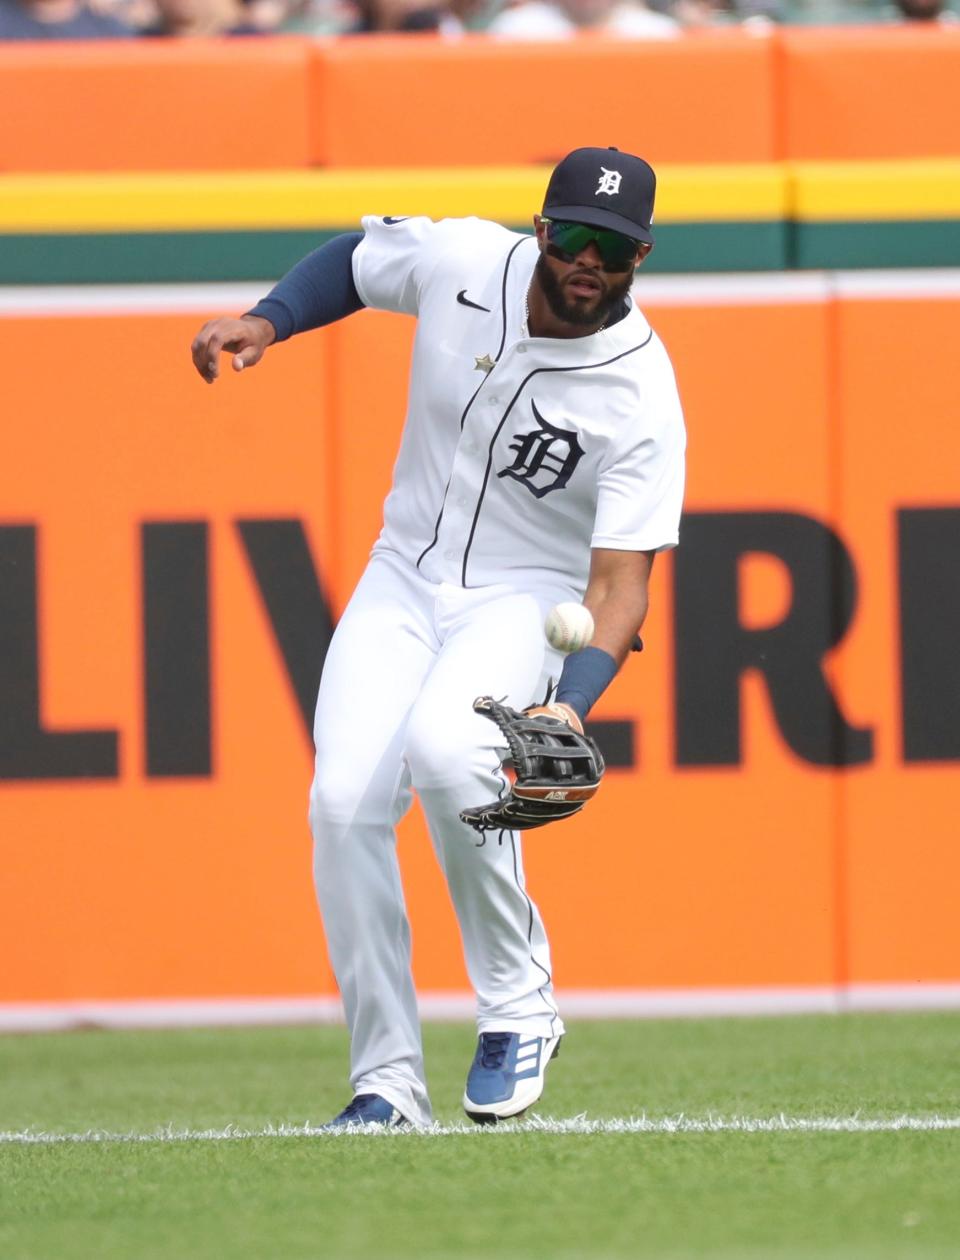 Tigers left fielder Willi Castro fields a ground ball hit by Blue Jays left fielder Raimel Tapia during the second inning on Saturday, June 11, 2022, at Comerica Park.